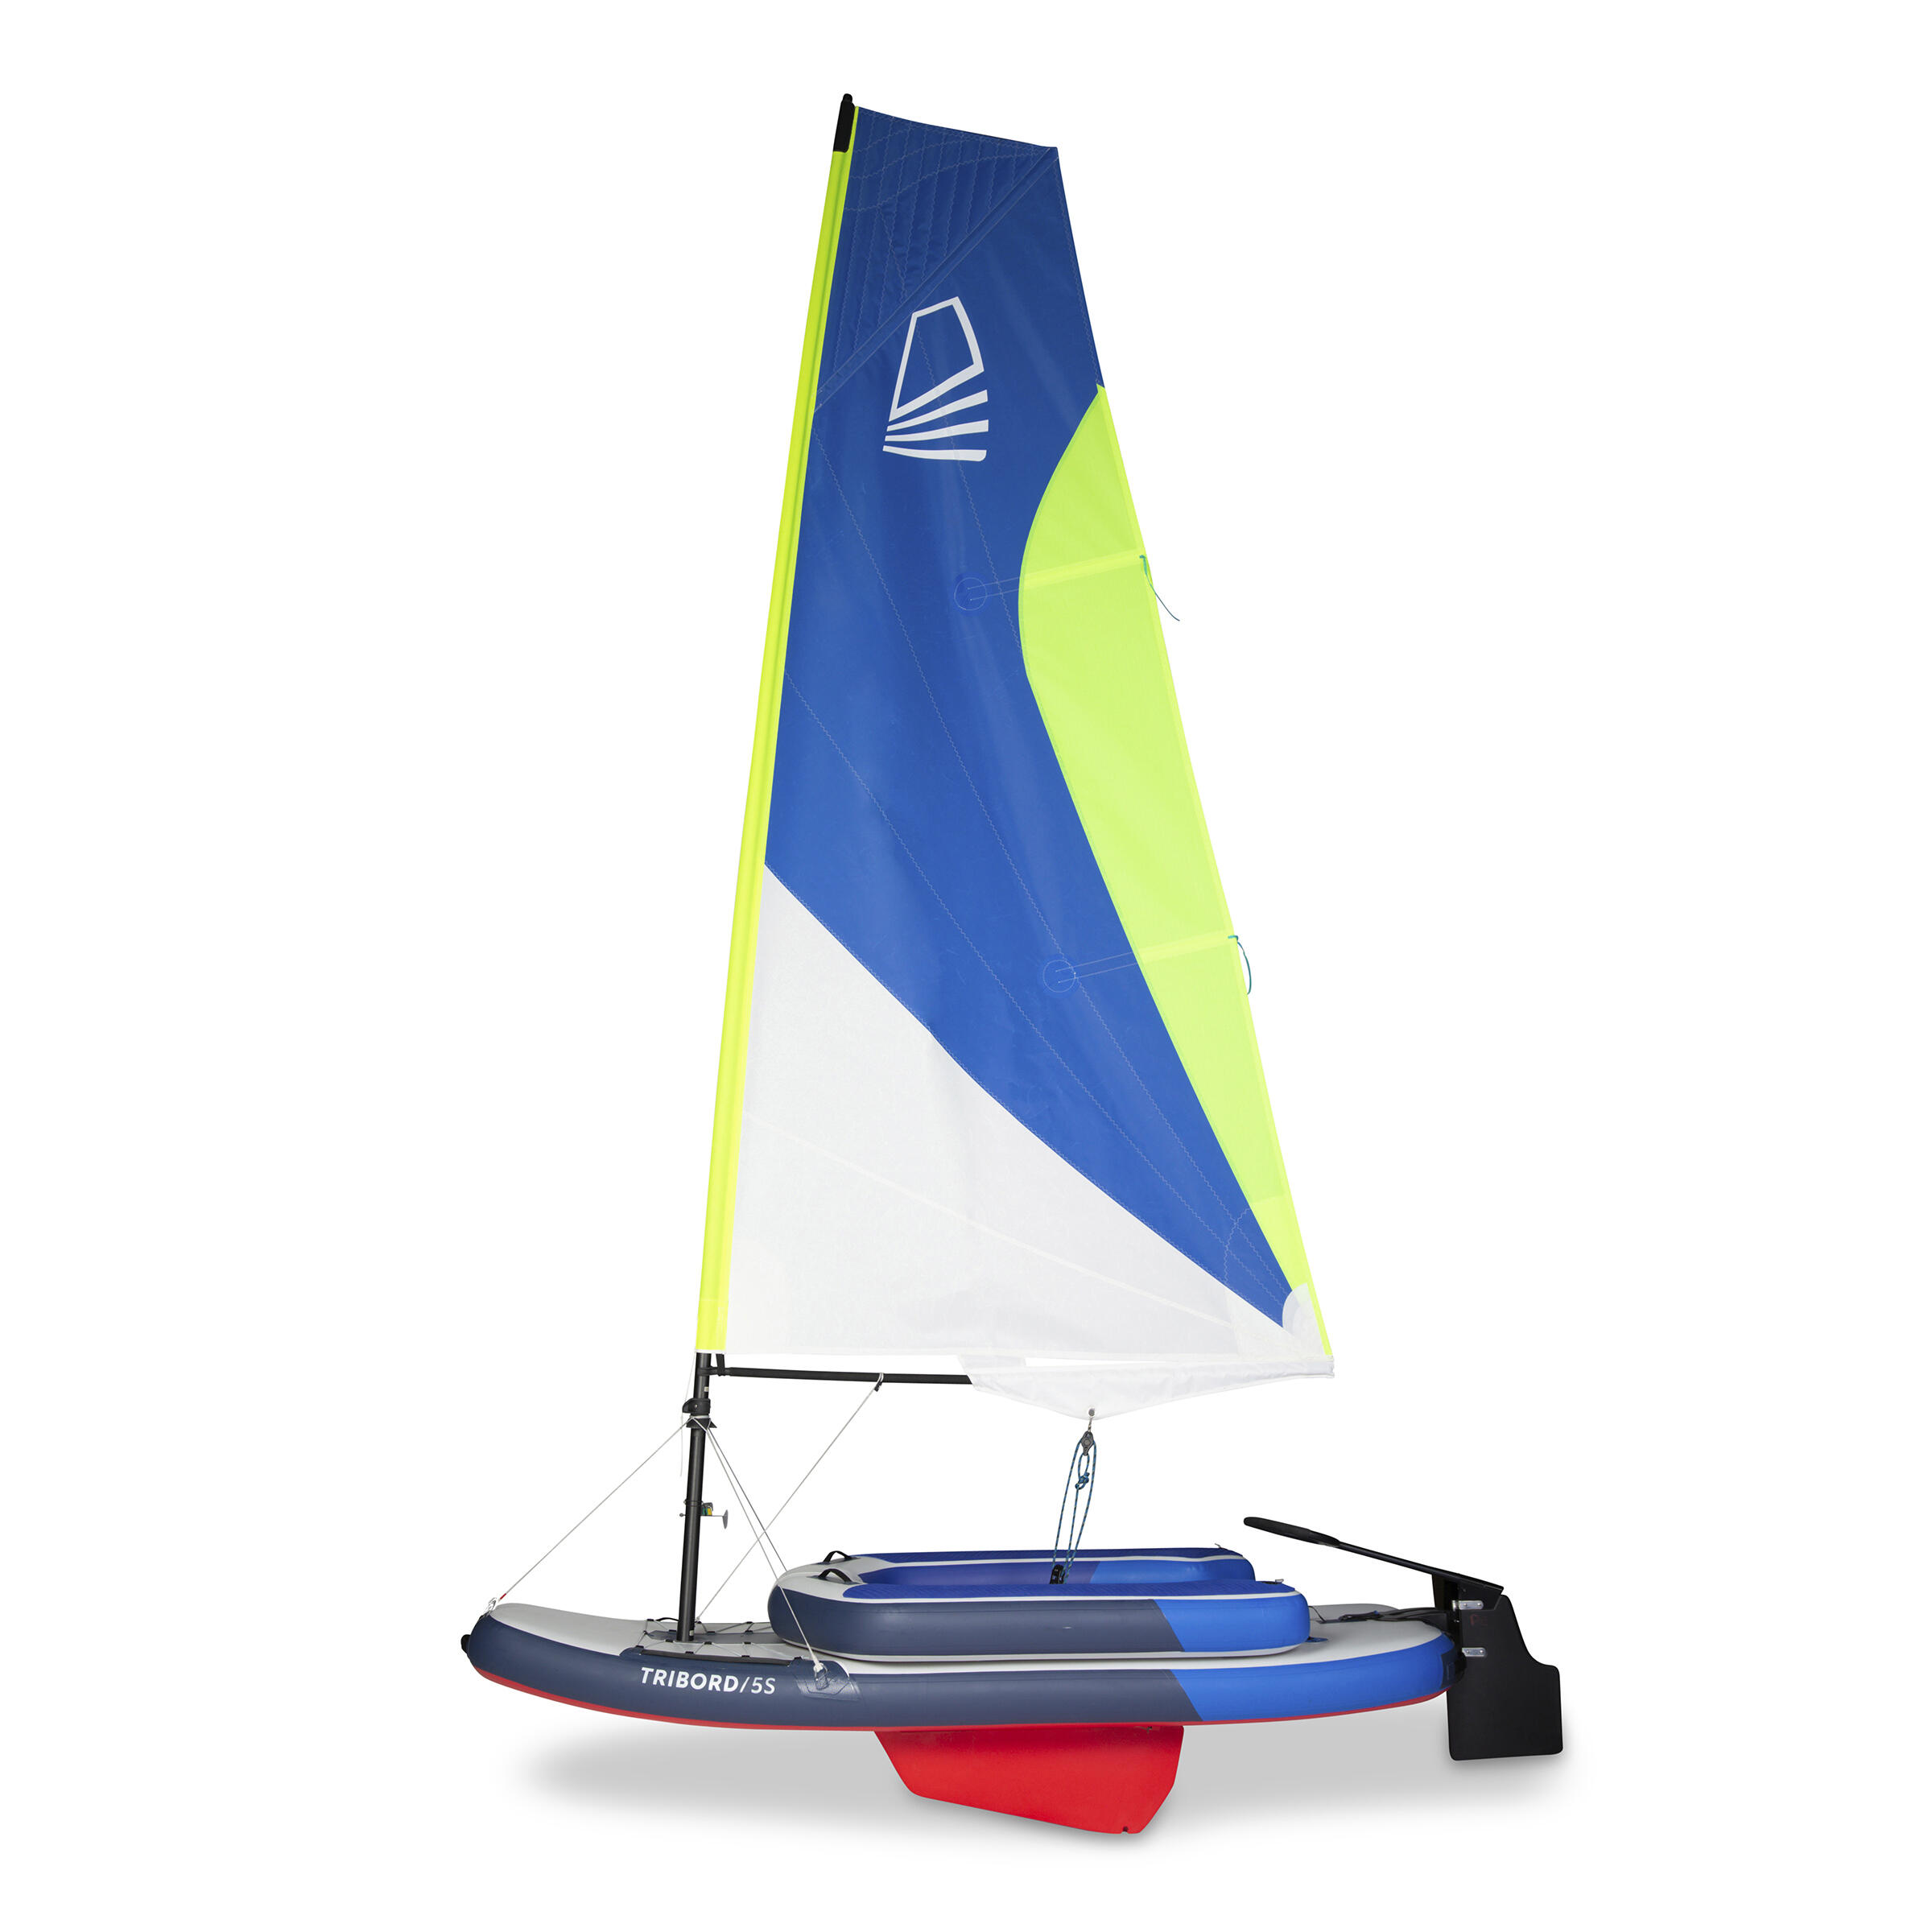 Inflatable sailing dinghy Tribord 5S 2/13